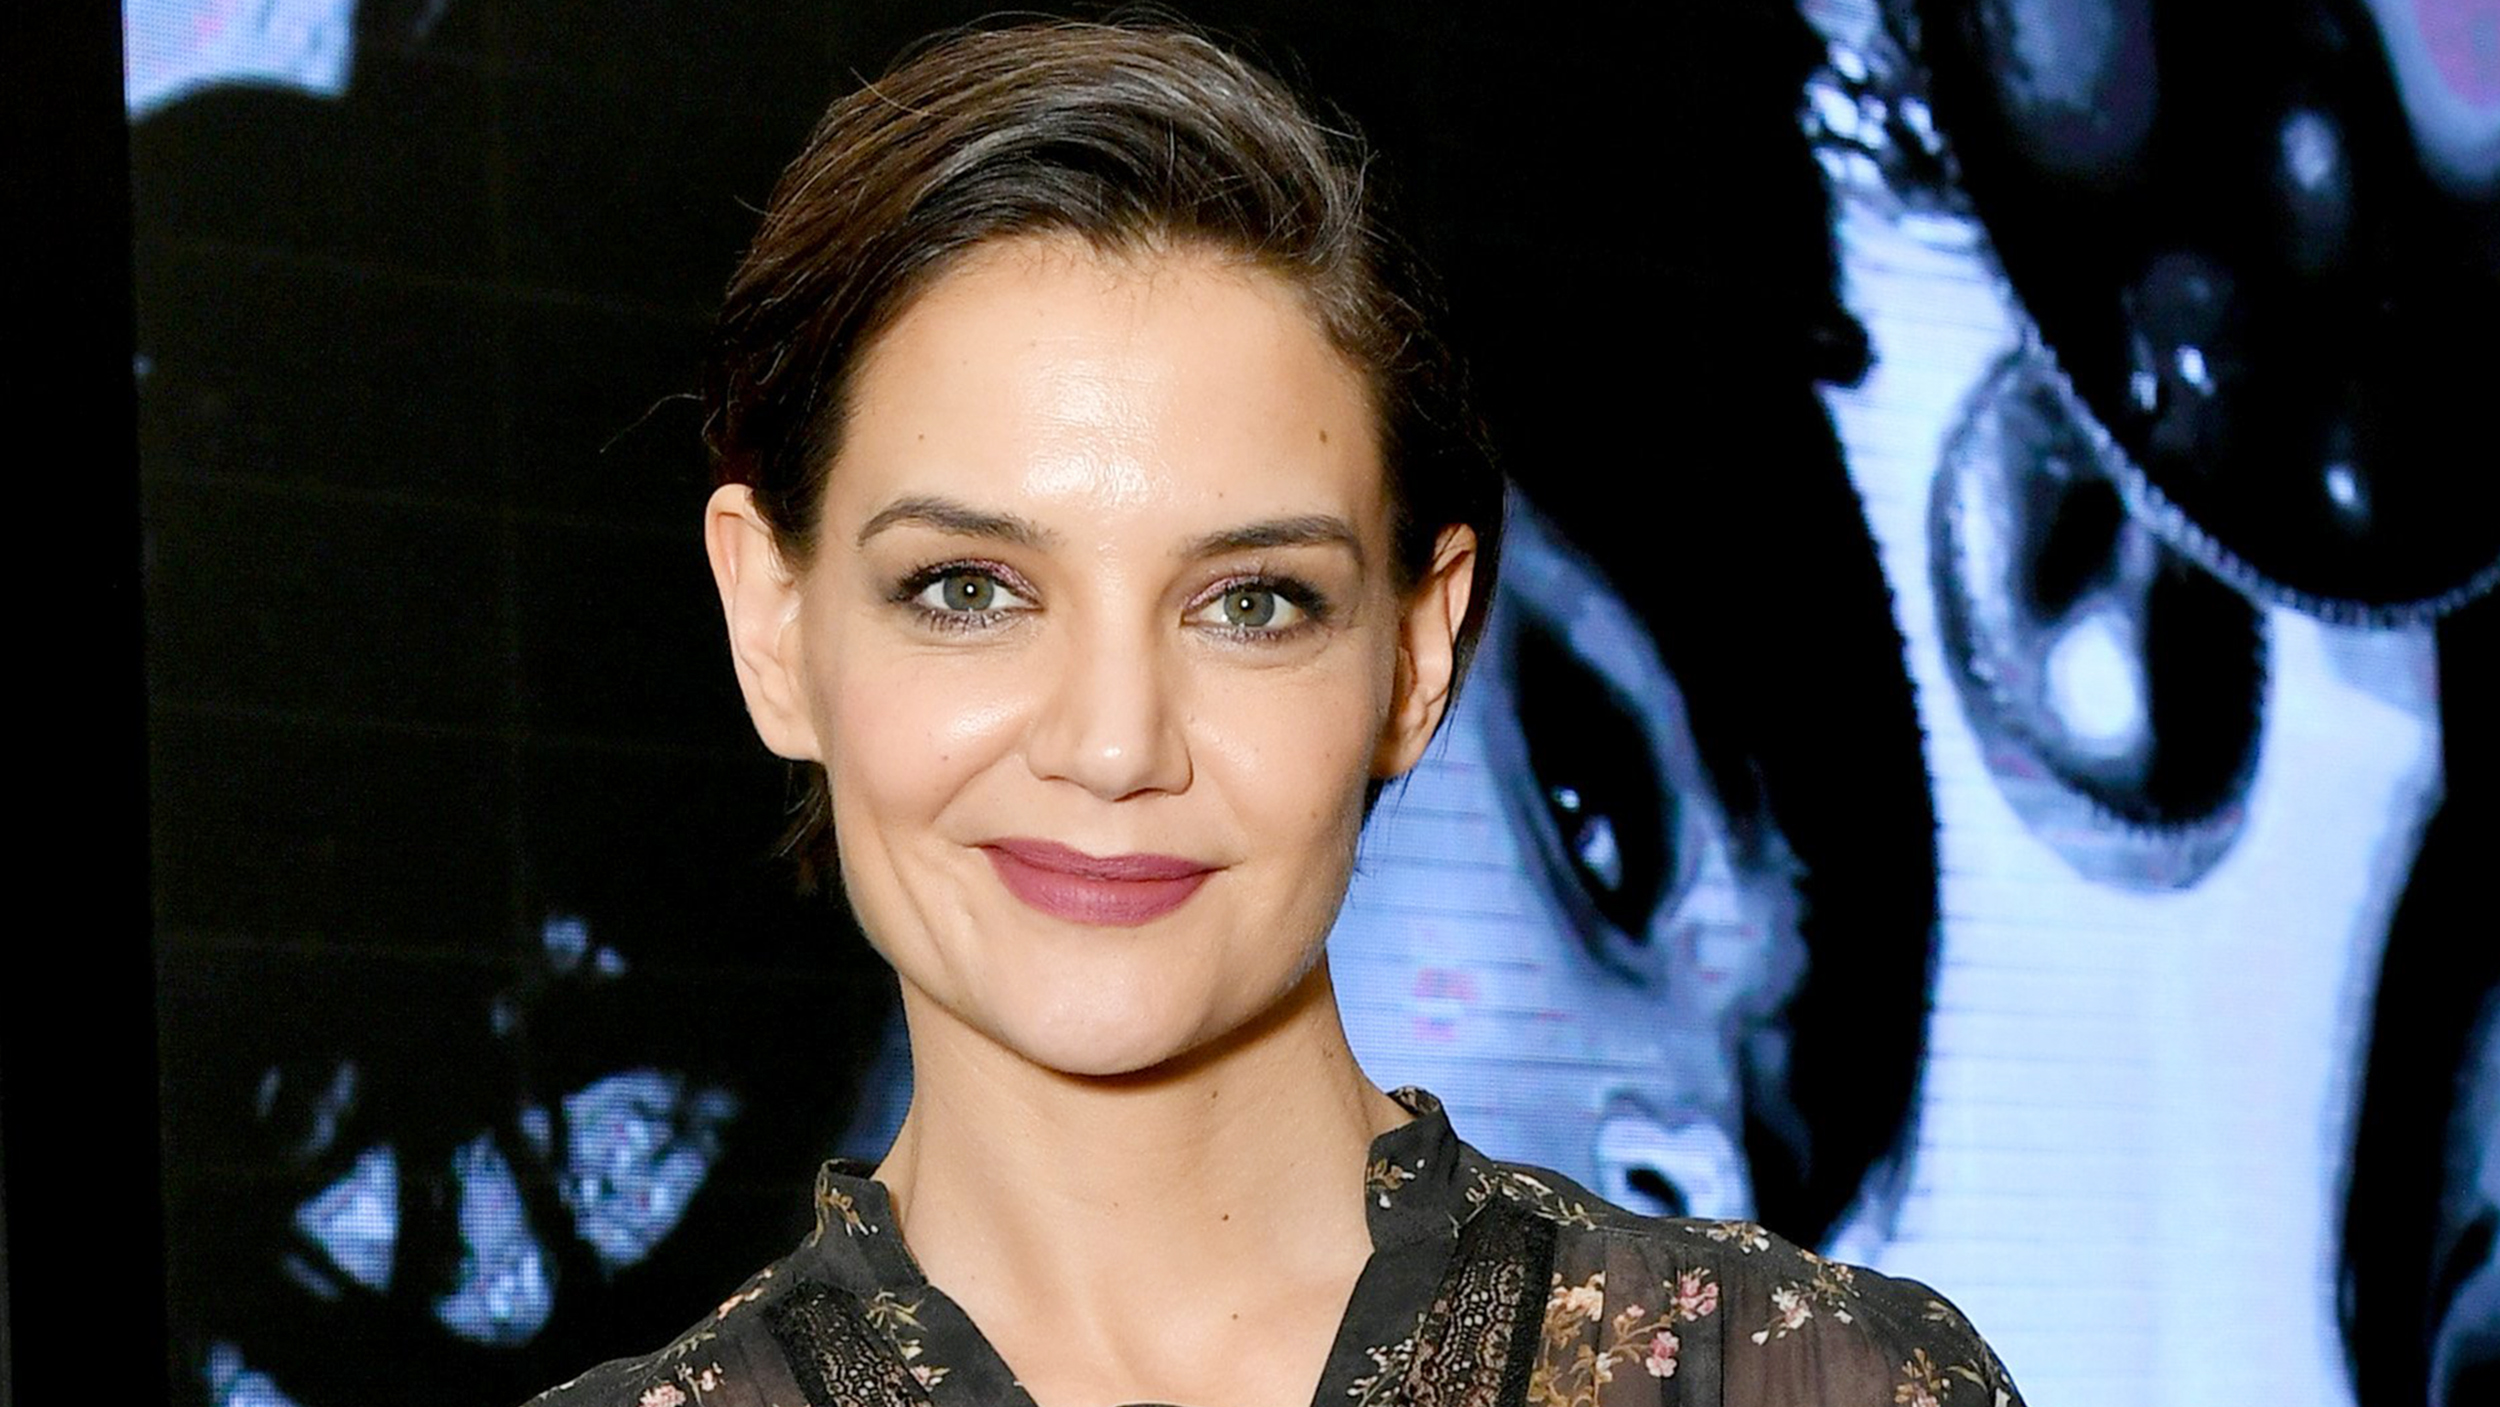 Katie Holmes on parenting Suri: 'I listen to her' - TODAY.com